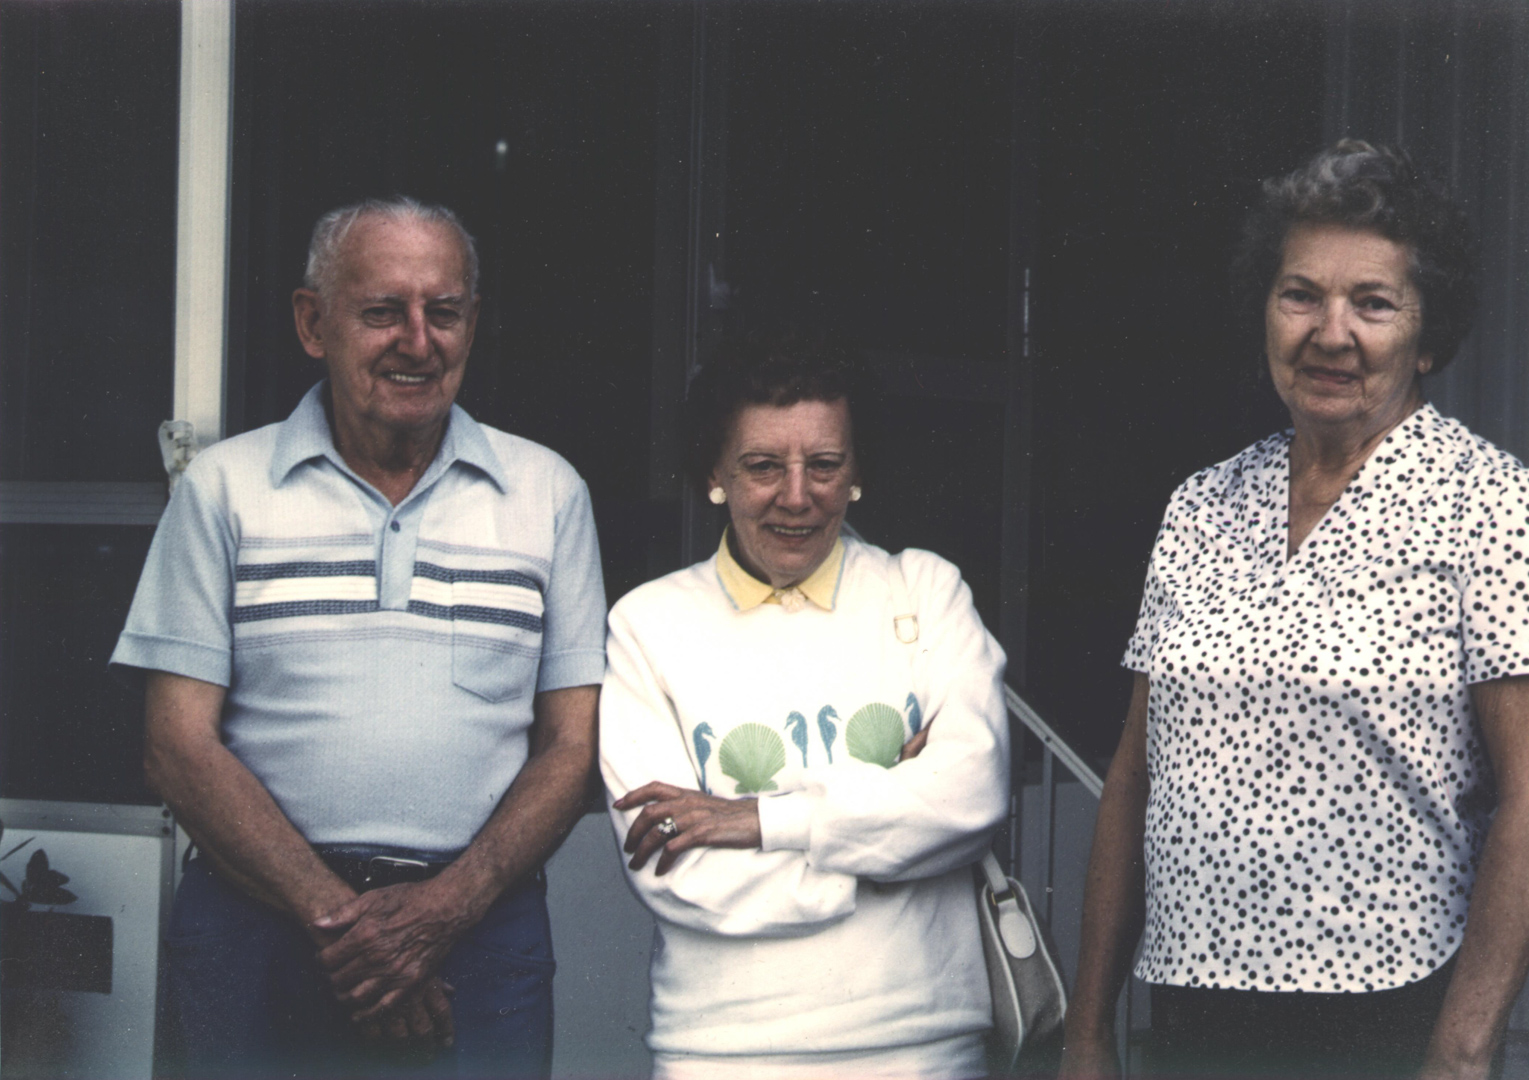 Rose Fitzgerald McManus (center) with brother Edward & Evelyn Rapp Fitzgerald (Fort Myers Beach, FL, ca 1985)